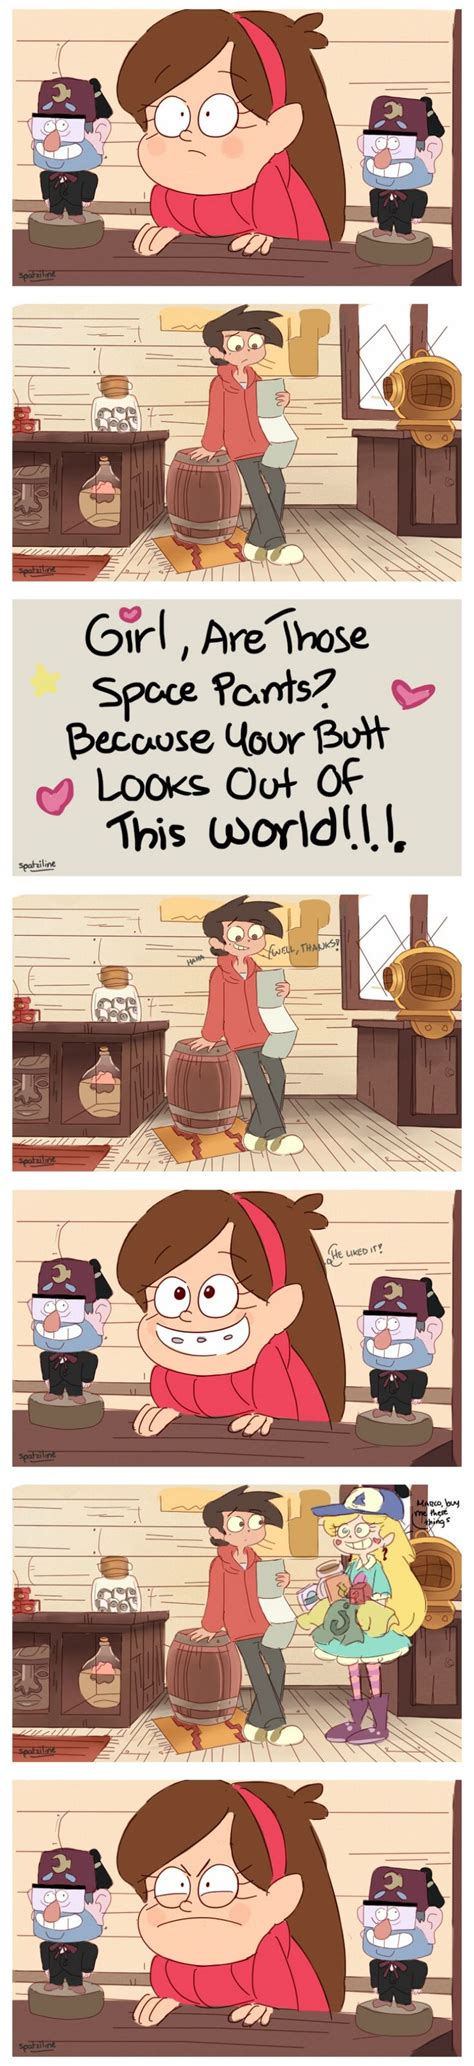 76 best images about star vs the forces of evil on